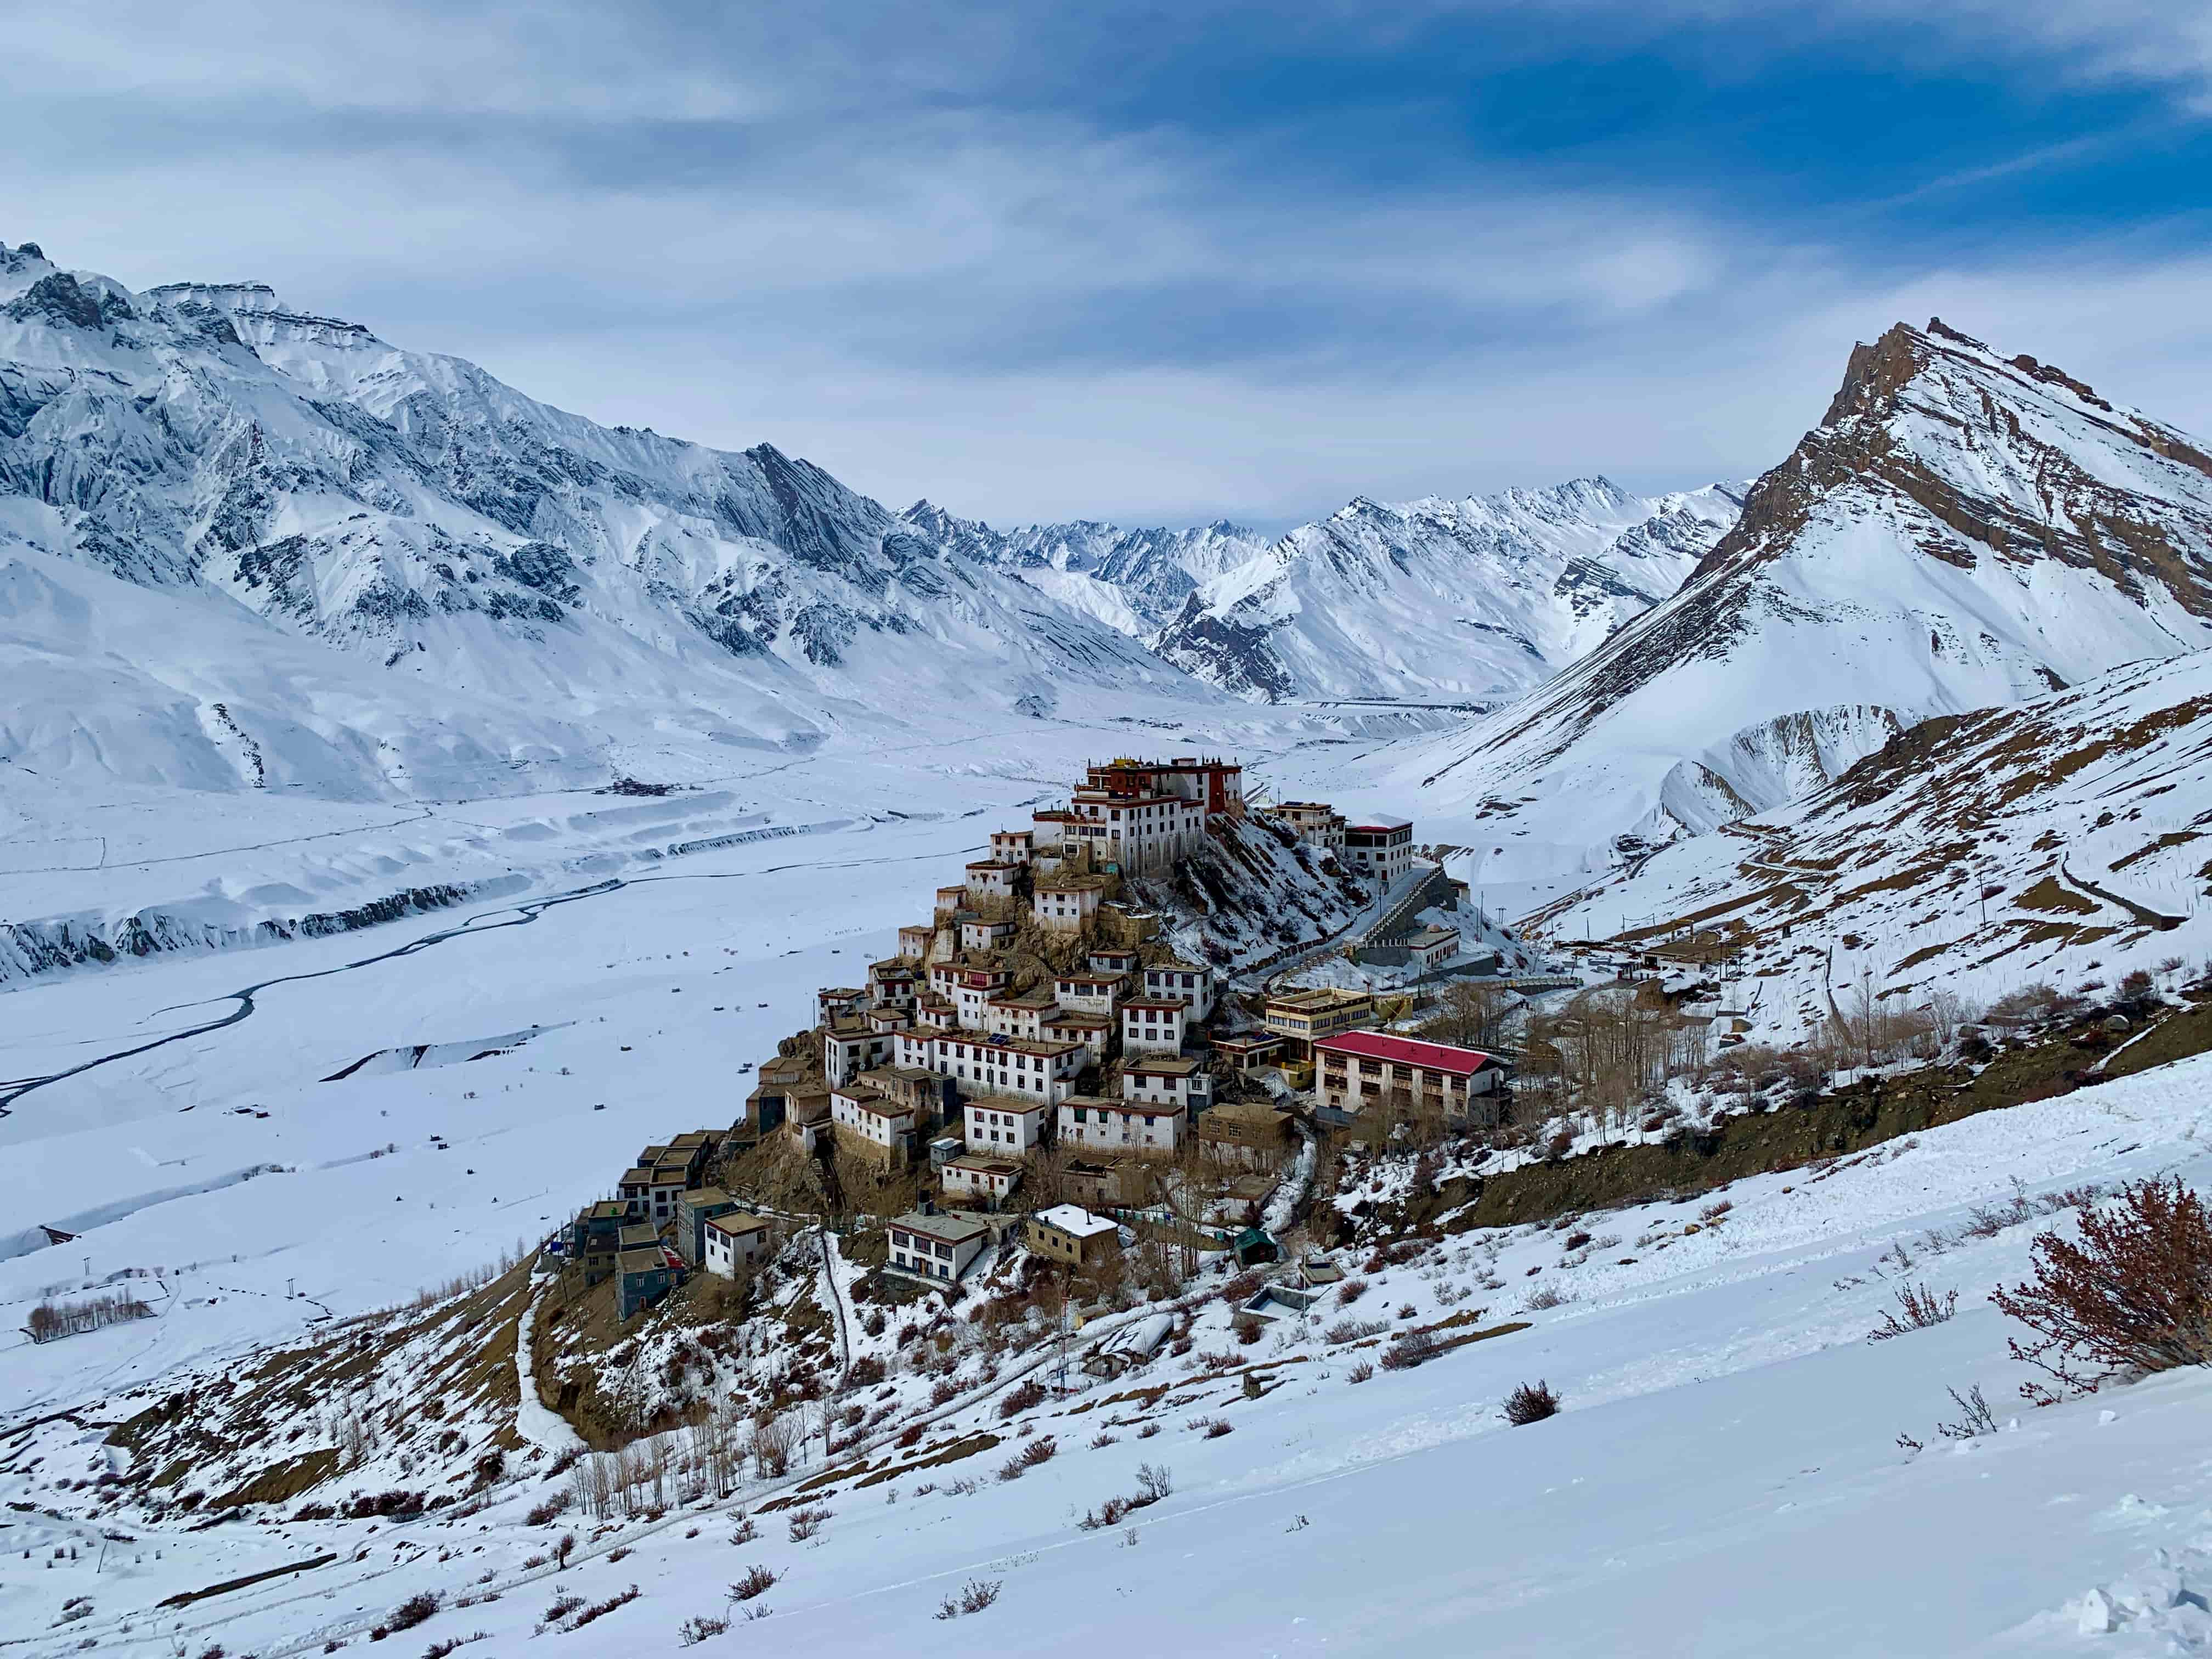 A monastery in snowy mountains.